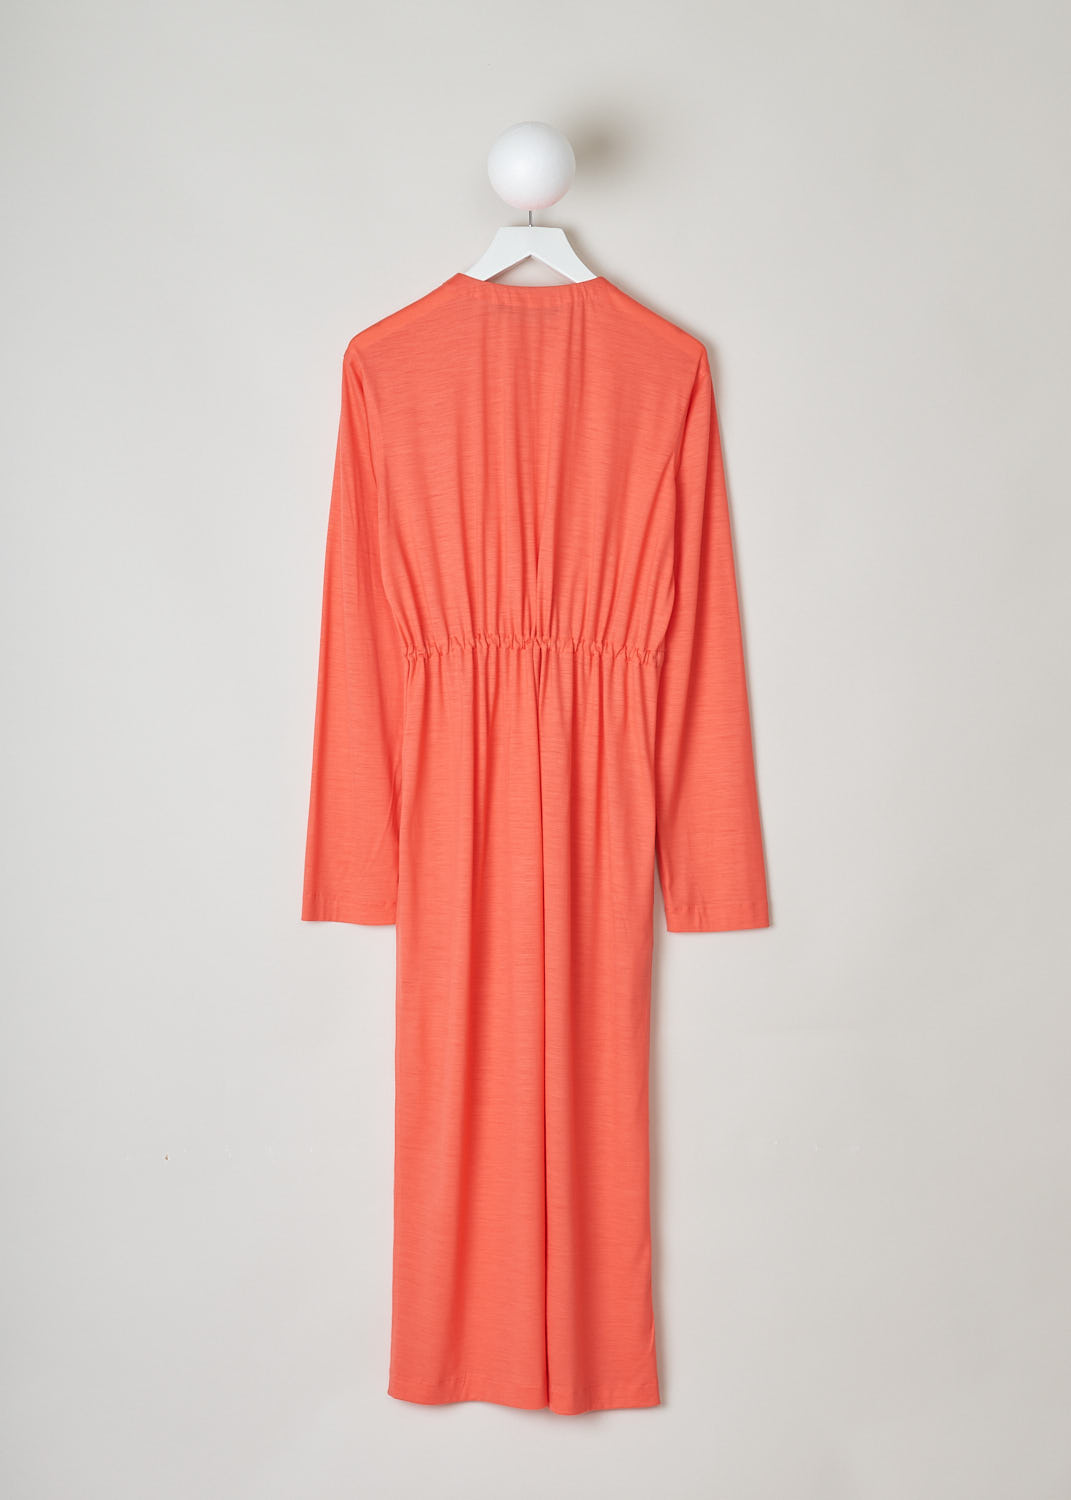 SOFIE Dâ€™HOORE, LONG SLEEVE CORAL DRESS, DARA_WOJE_CORAL, Pink, Orange, Back, This coral colored maxi dress features a gathered elasticated neckline. The waist is also elasticated, cinching in the waist. Slant pockets can be found concealed in the seam.
